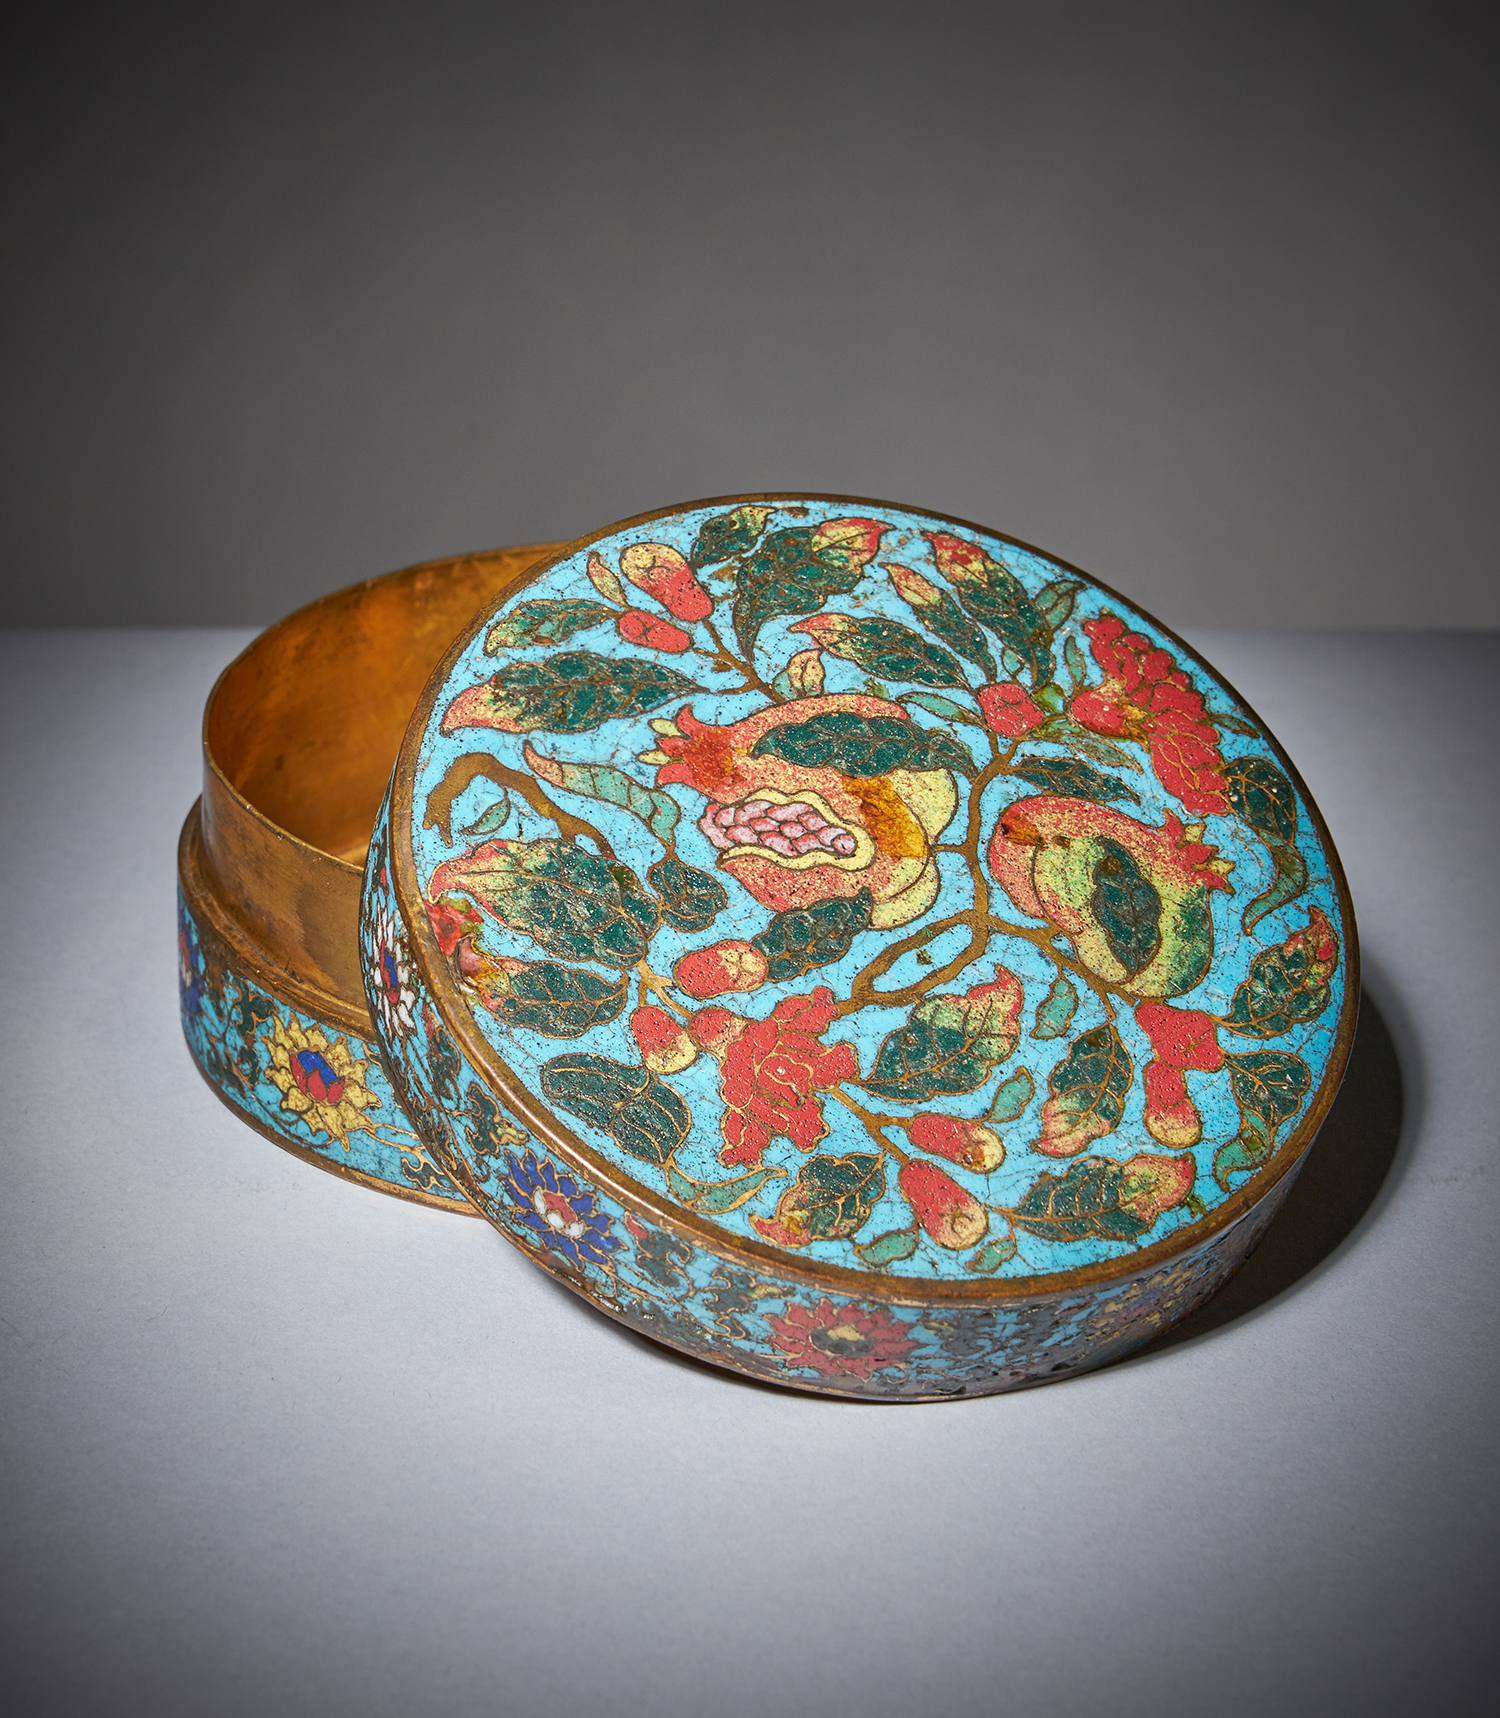 Ming cloisonné box discovered in family attic up for auction at 